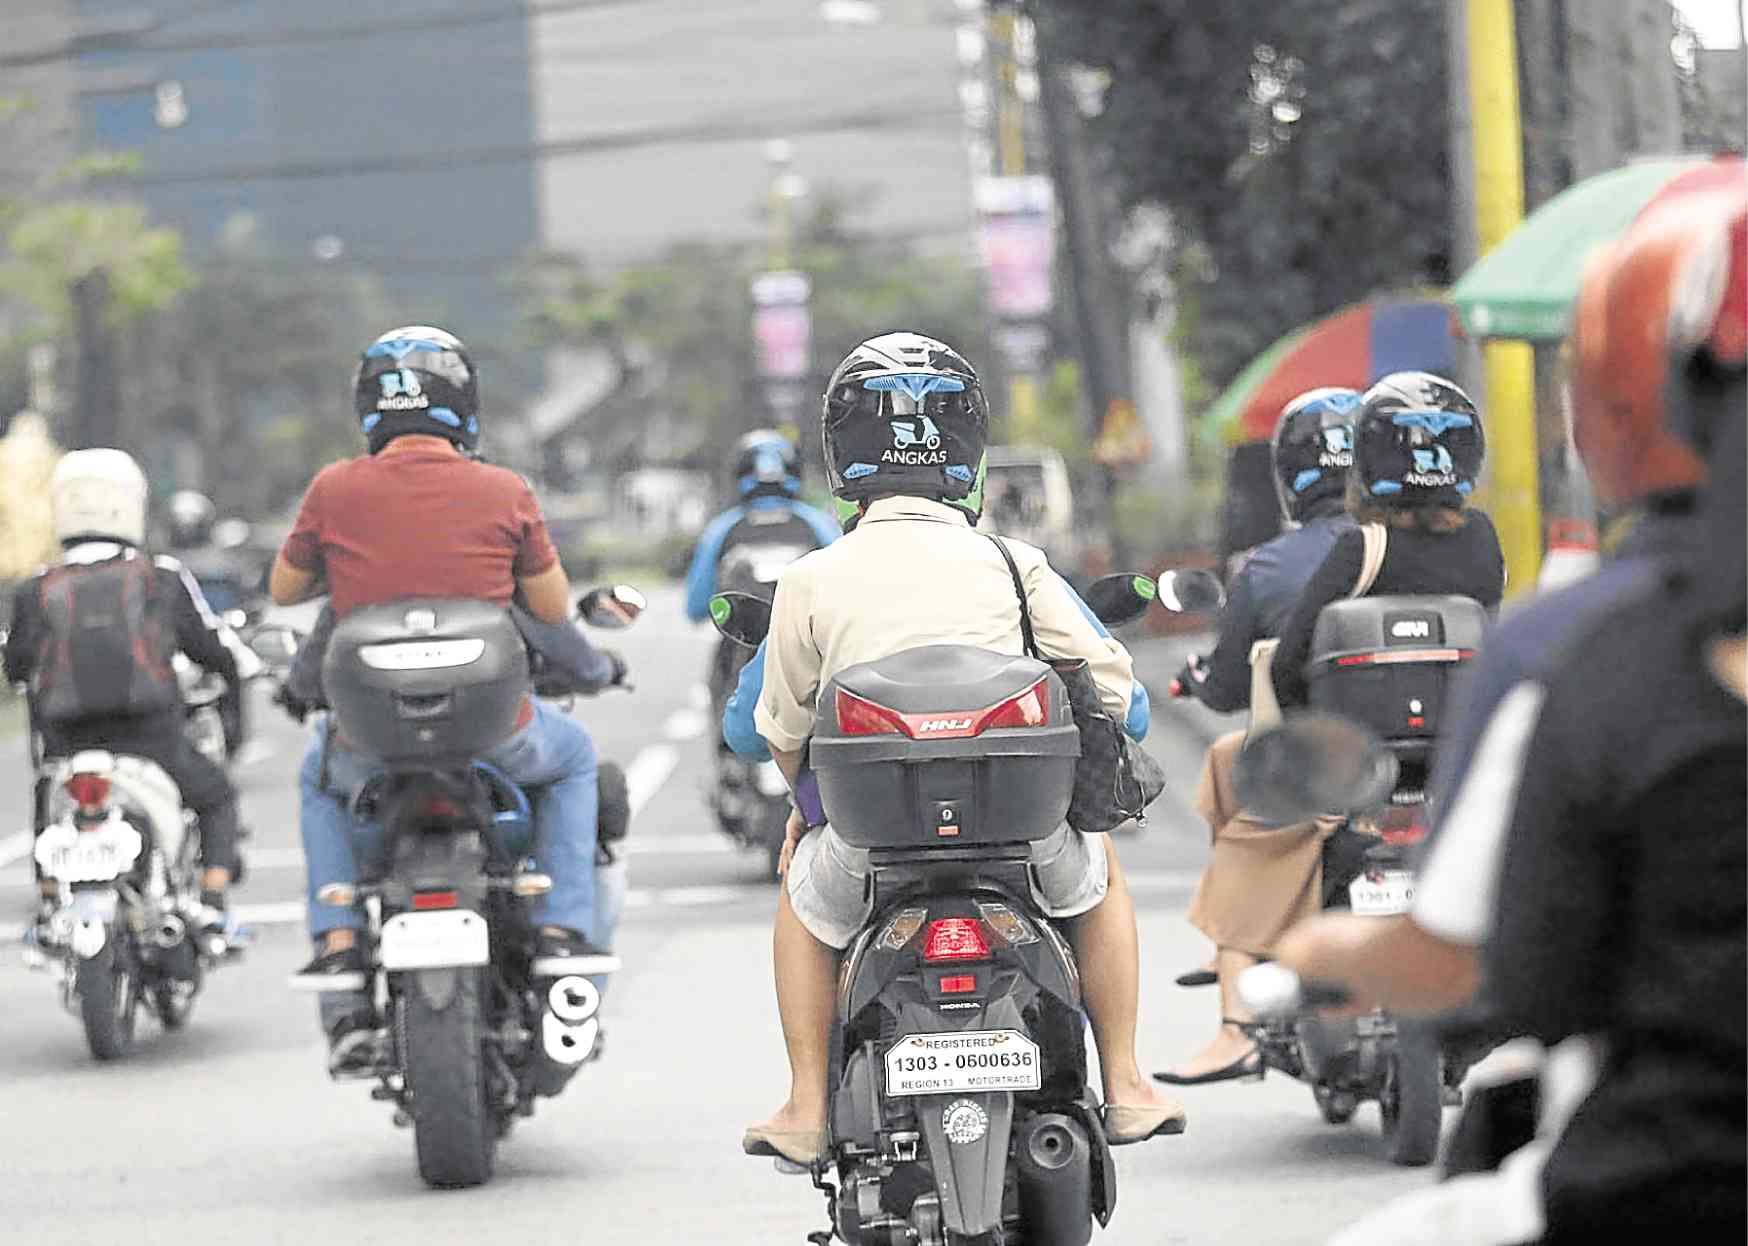 DOTr: Angkas has 6 months to prove rides safe, drivers disciplined